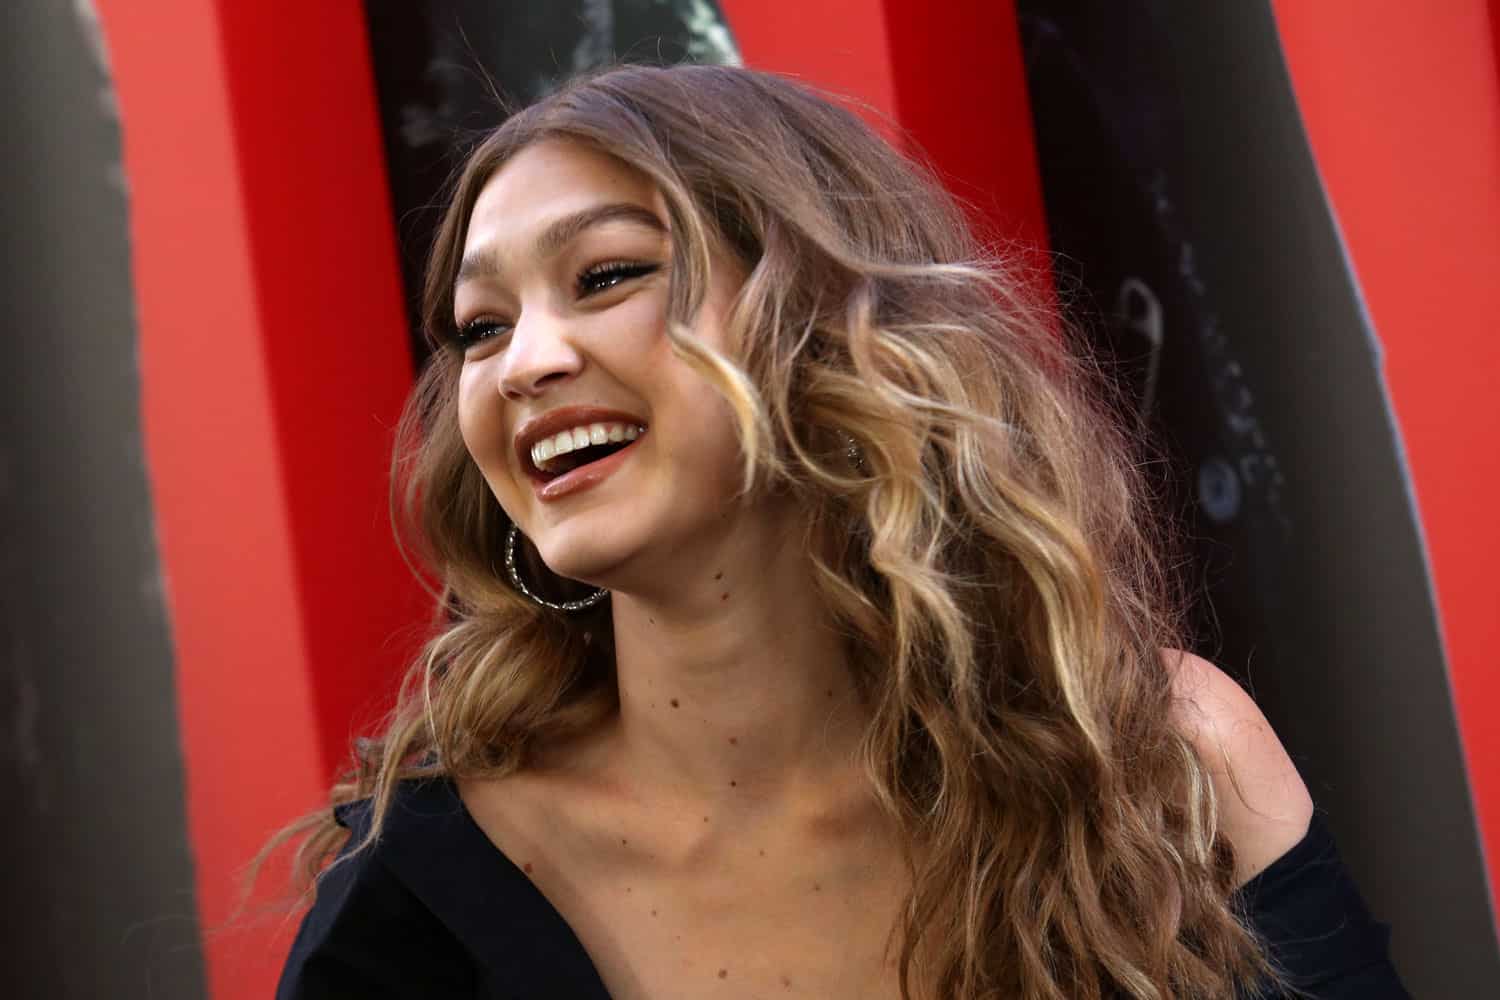 Gigi Hadid Debuts the FAO Schwarz Toy Soldiers Uniforms She Designed 